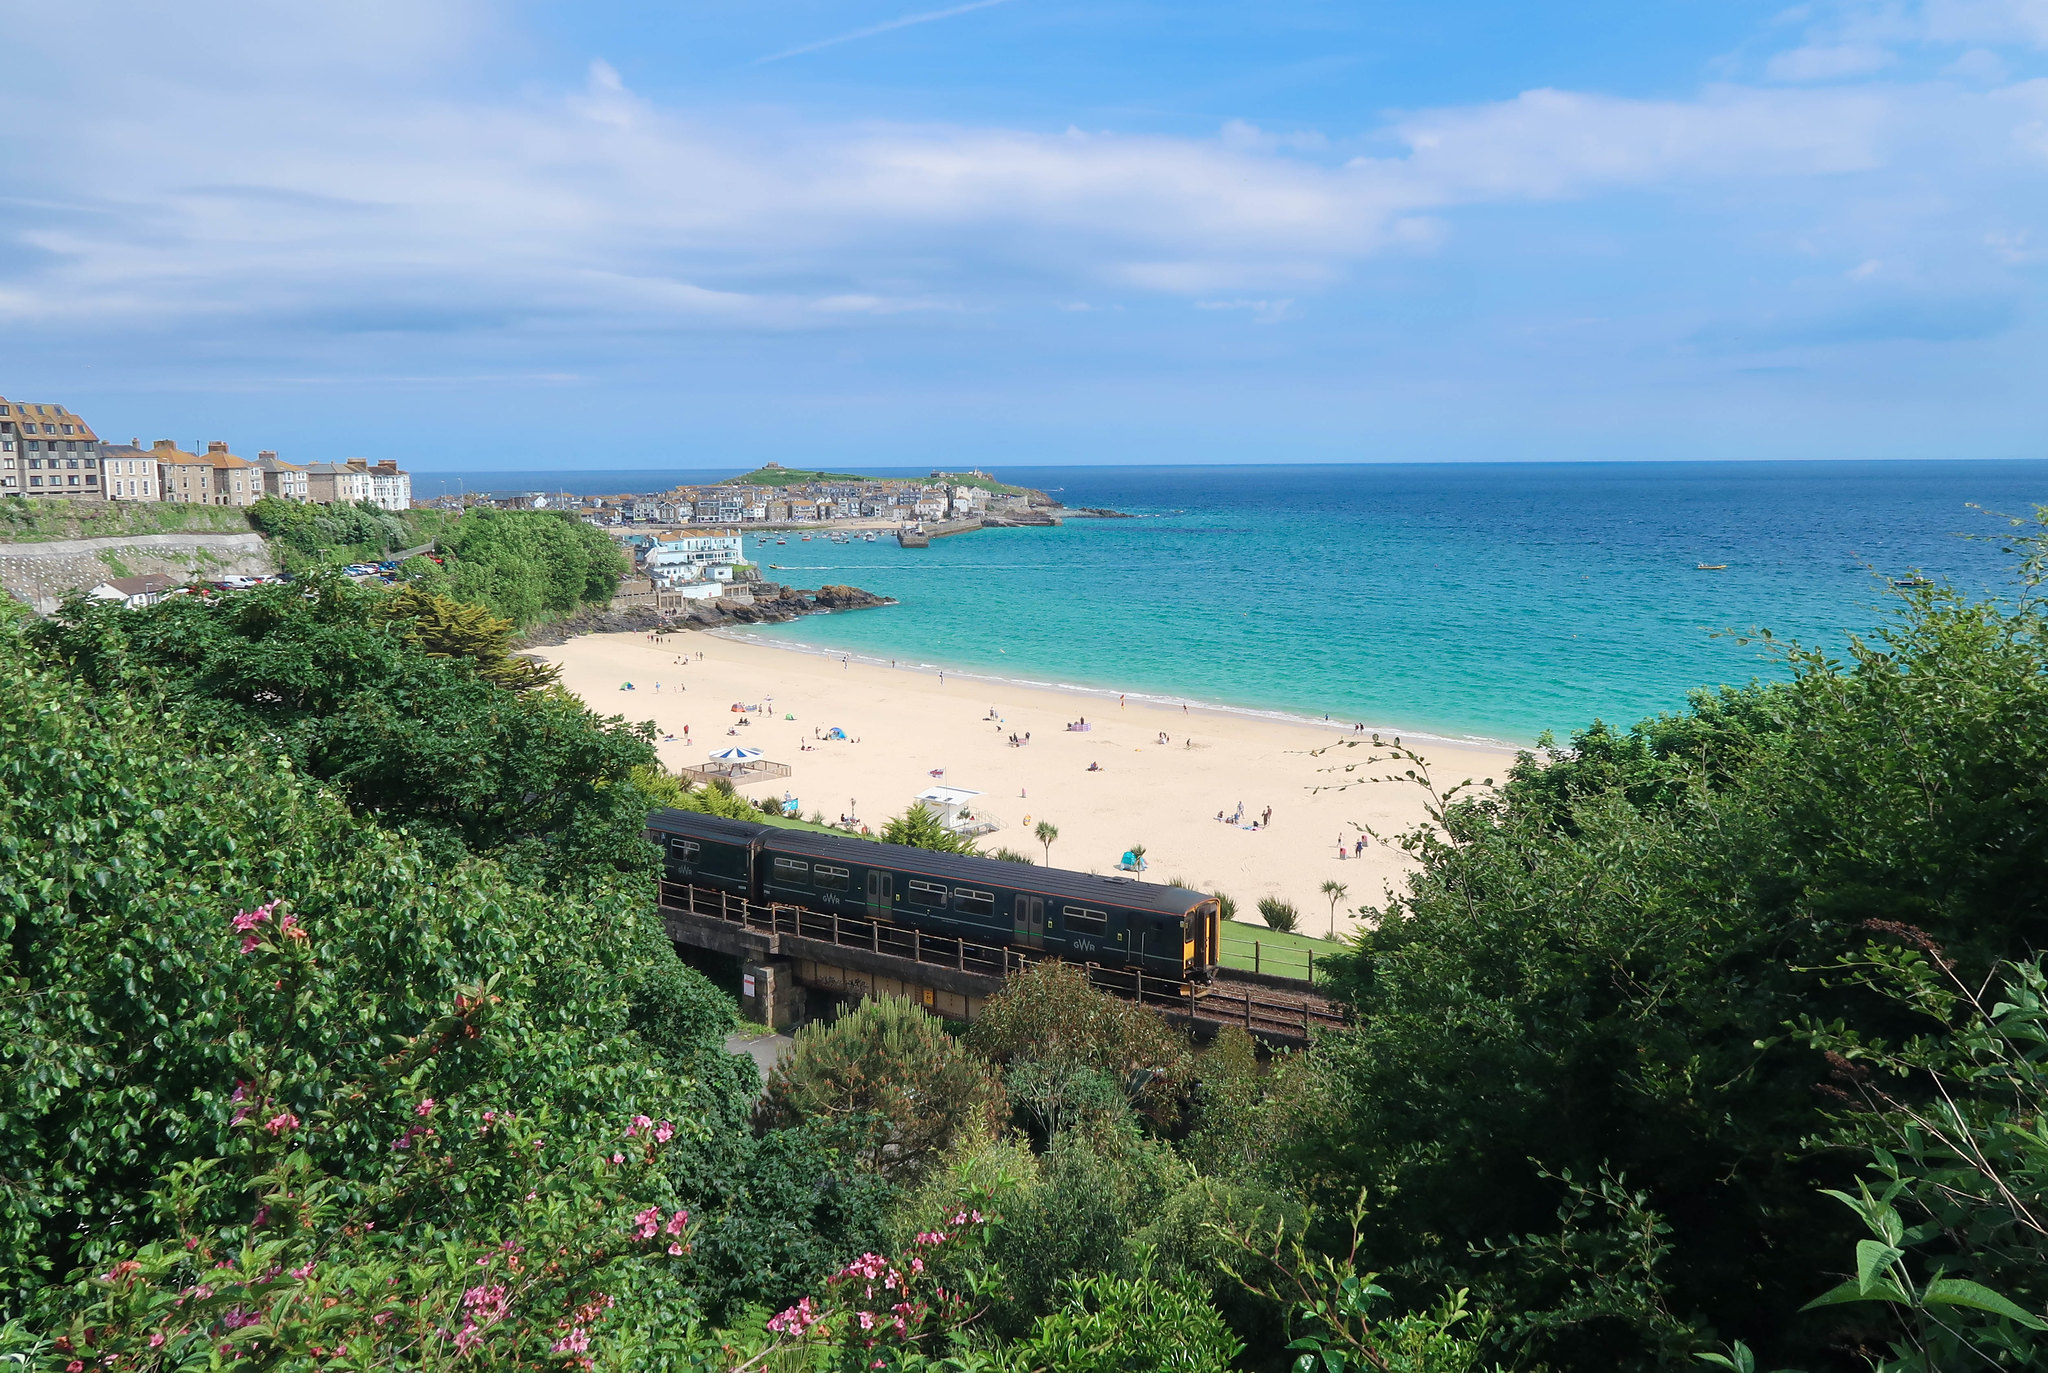 St Ives Bay Line Train - Photo by Sykes Cottages - Flikr